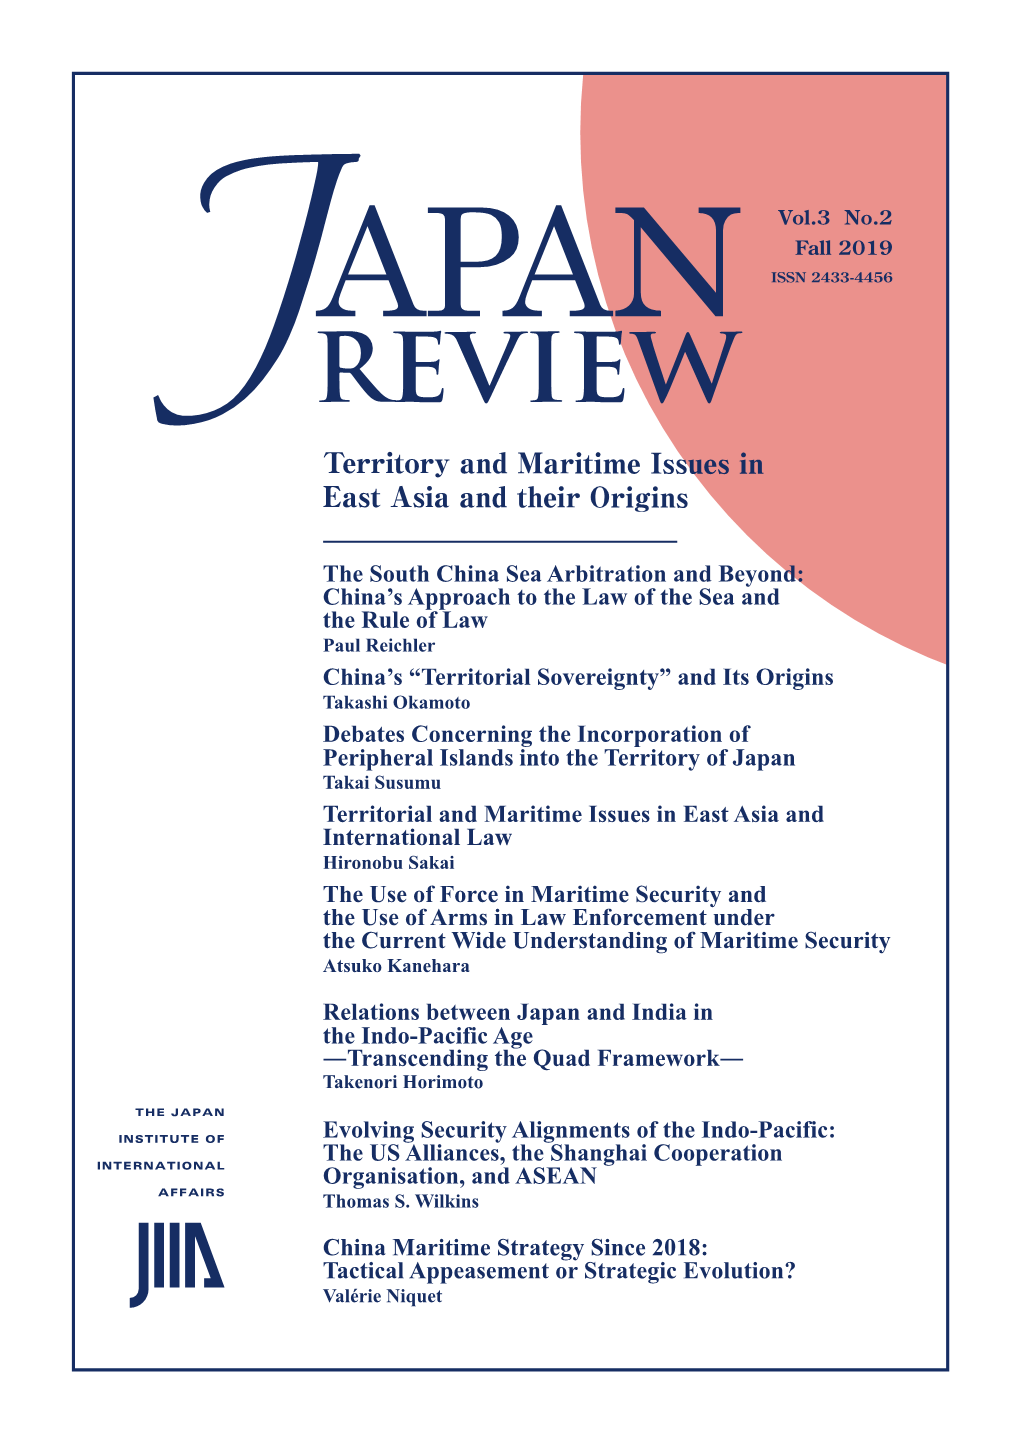 REVIEW Territory and Maritime Issues in East Asia and Their Origins